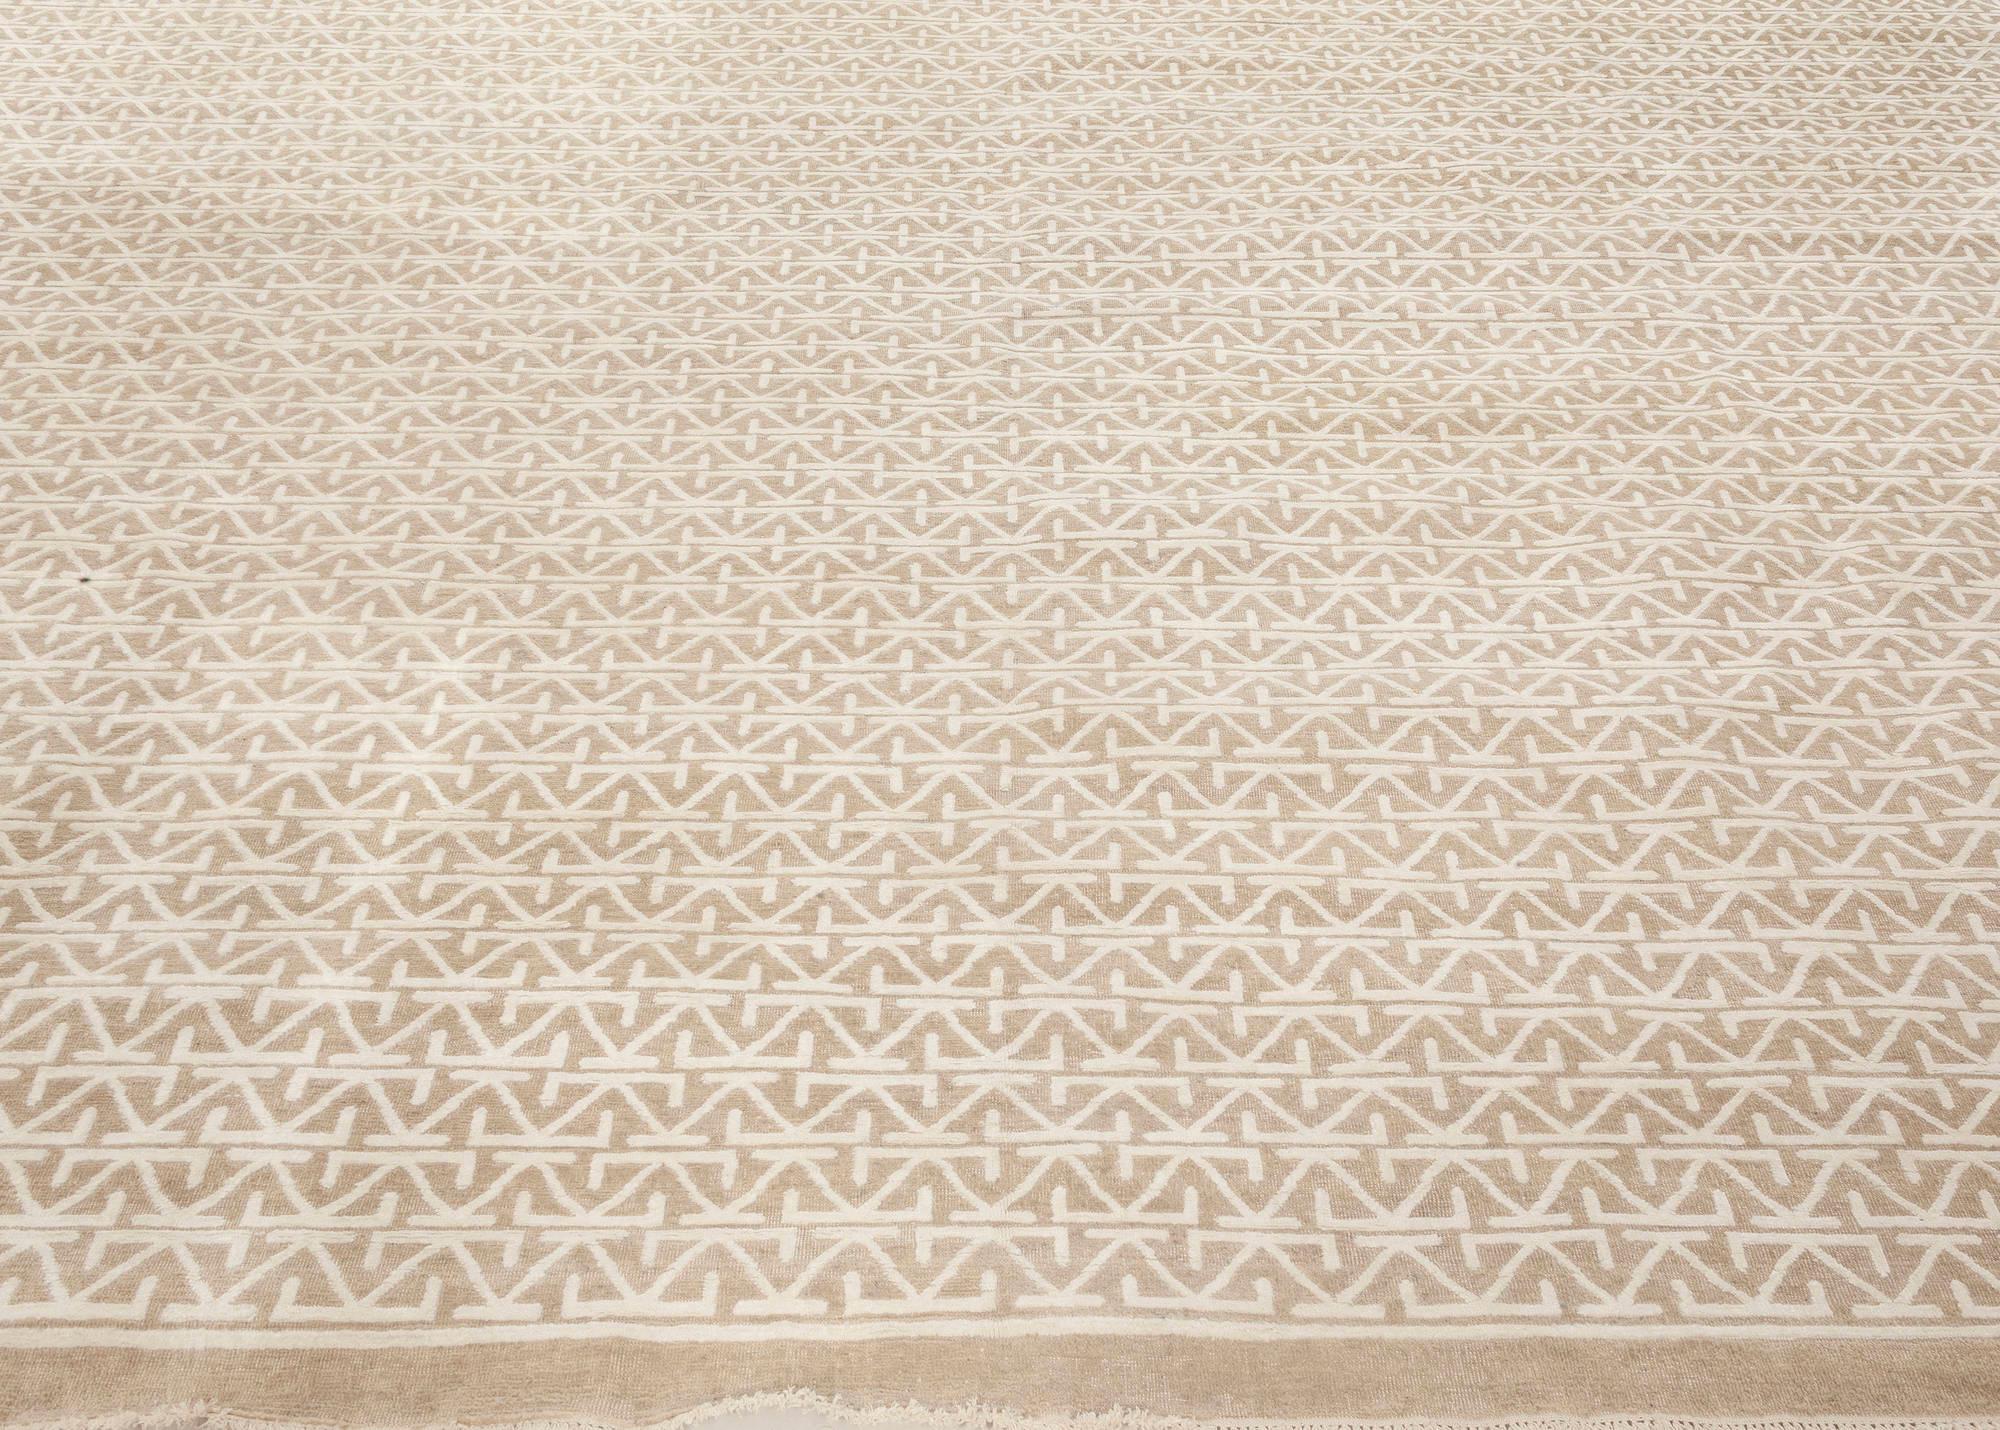 Hand-Knotted Contemporary Oriental Inspired Beige and White Rug by Doris Leslie Blau For Sale